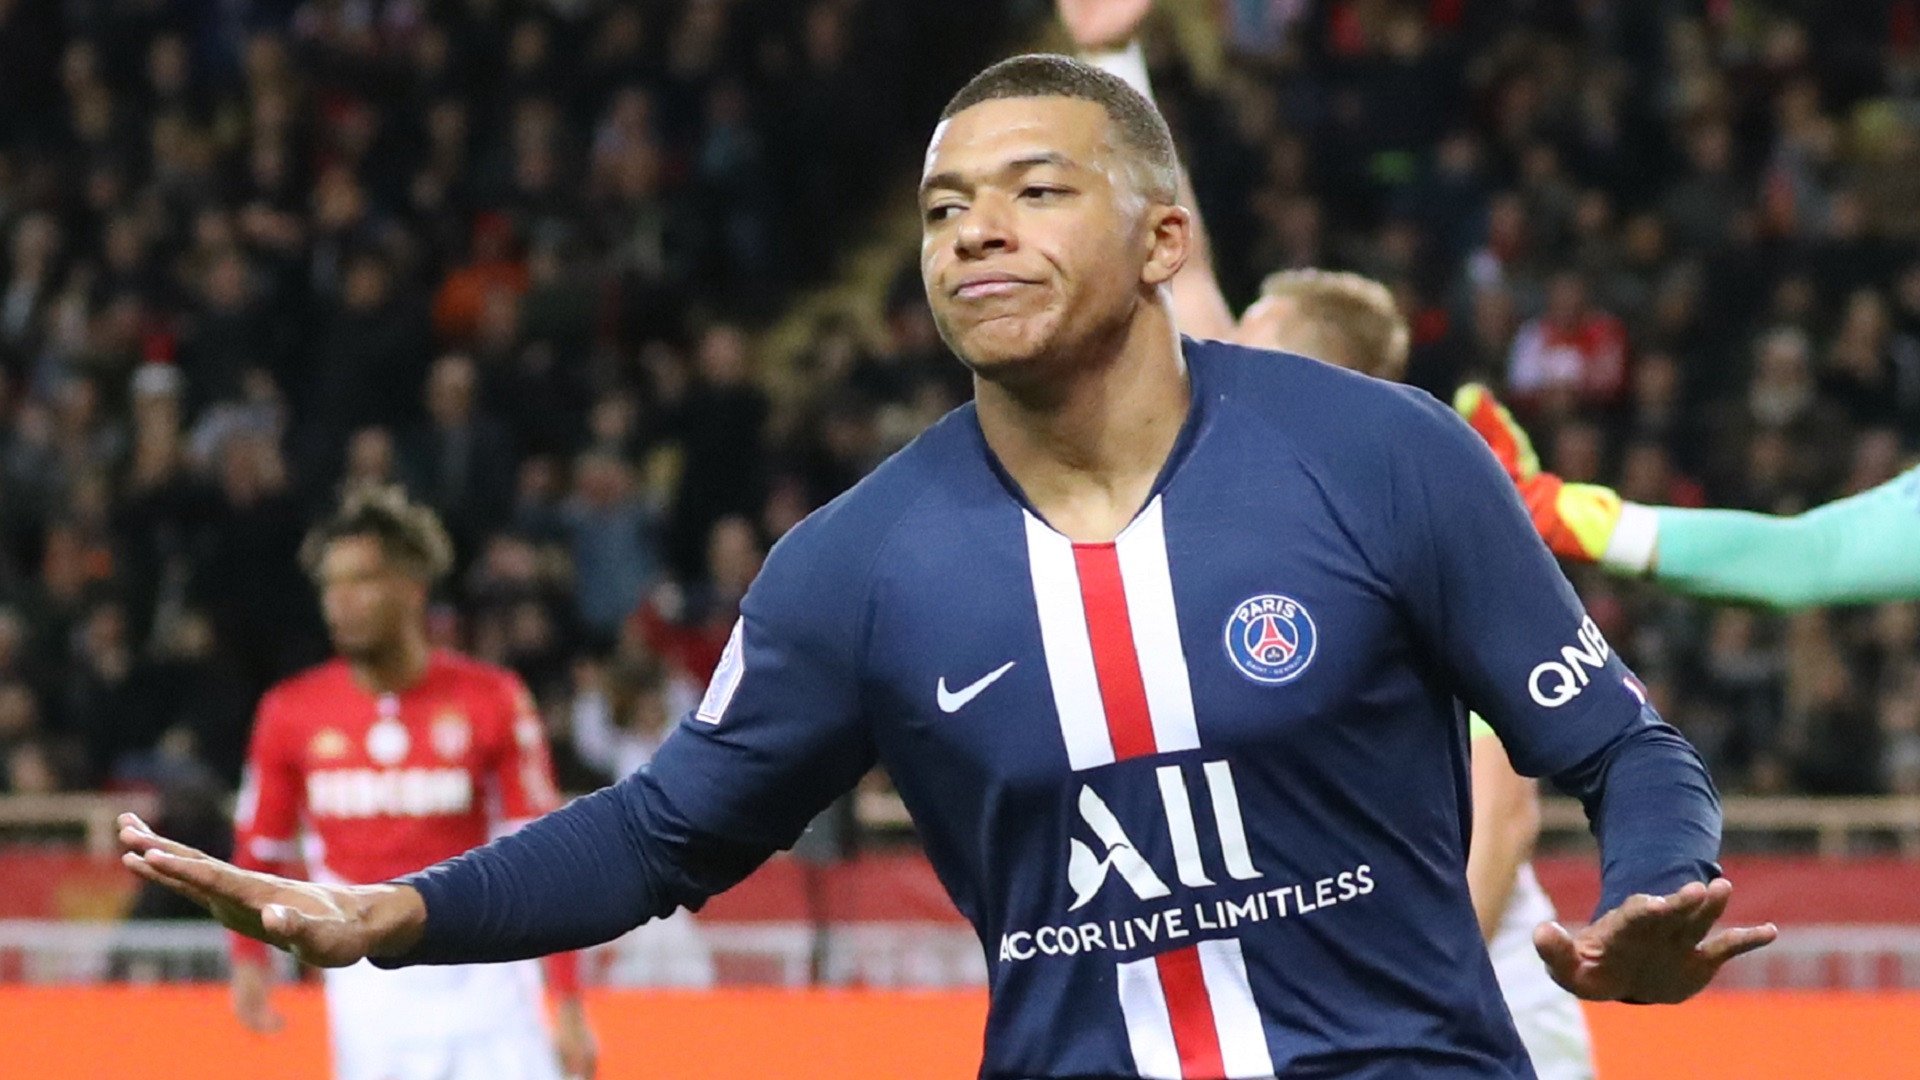 Liverpool interested in Mbappe: Klopp